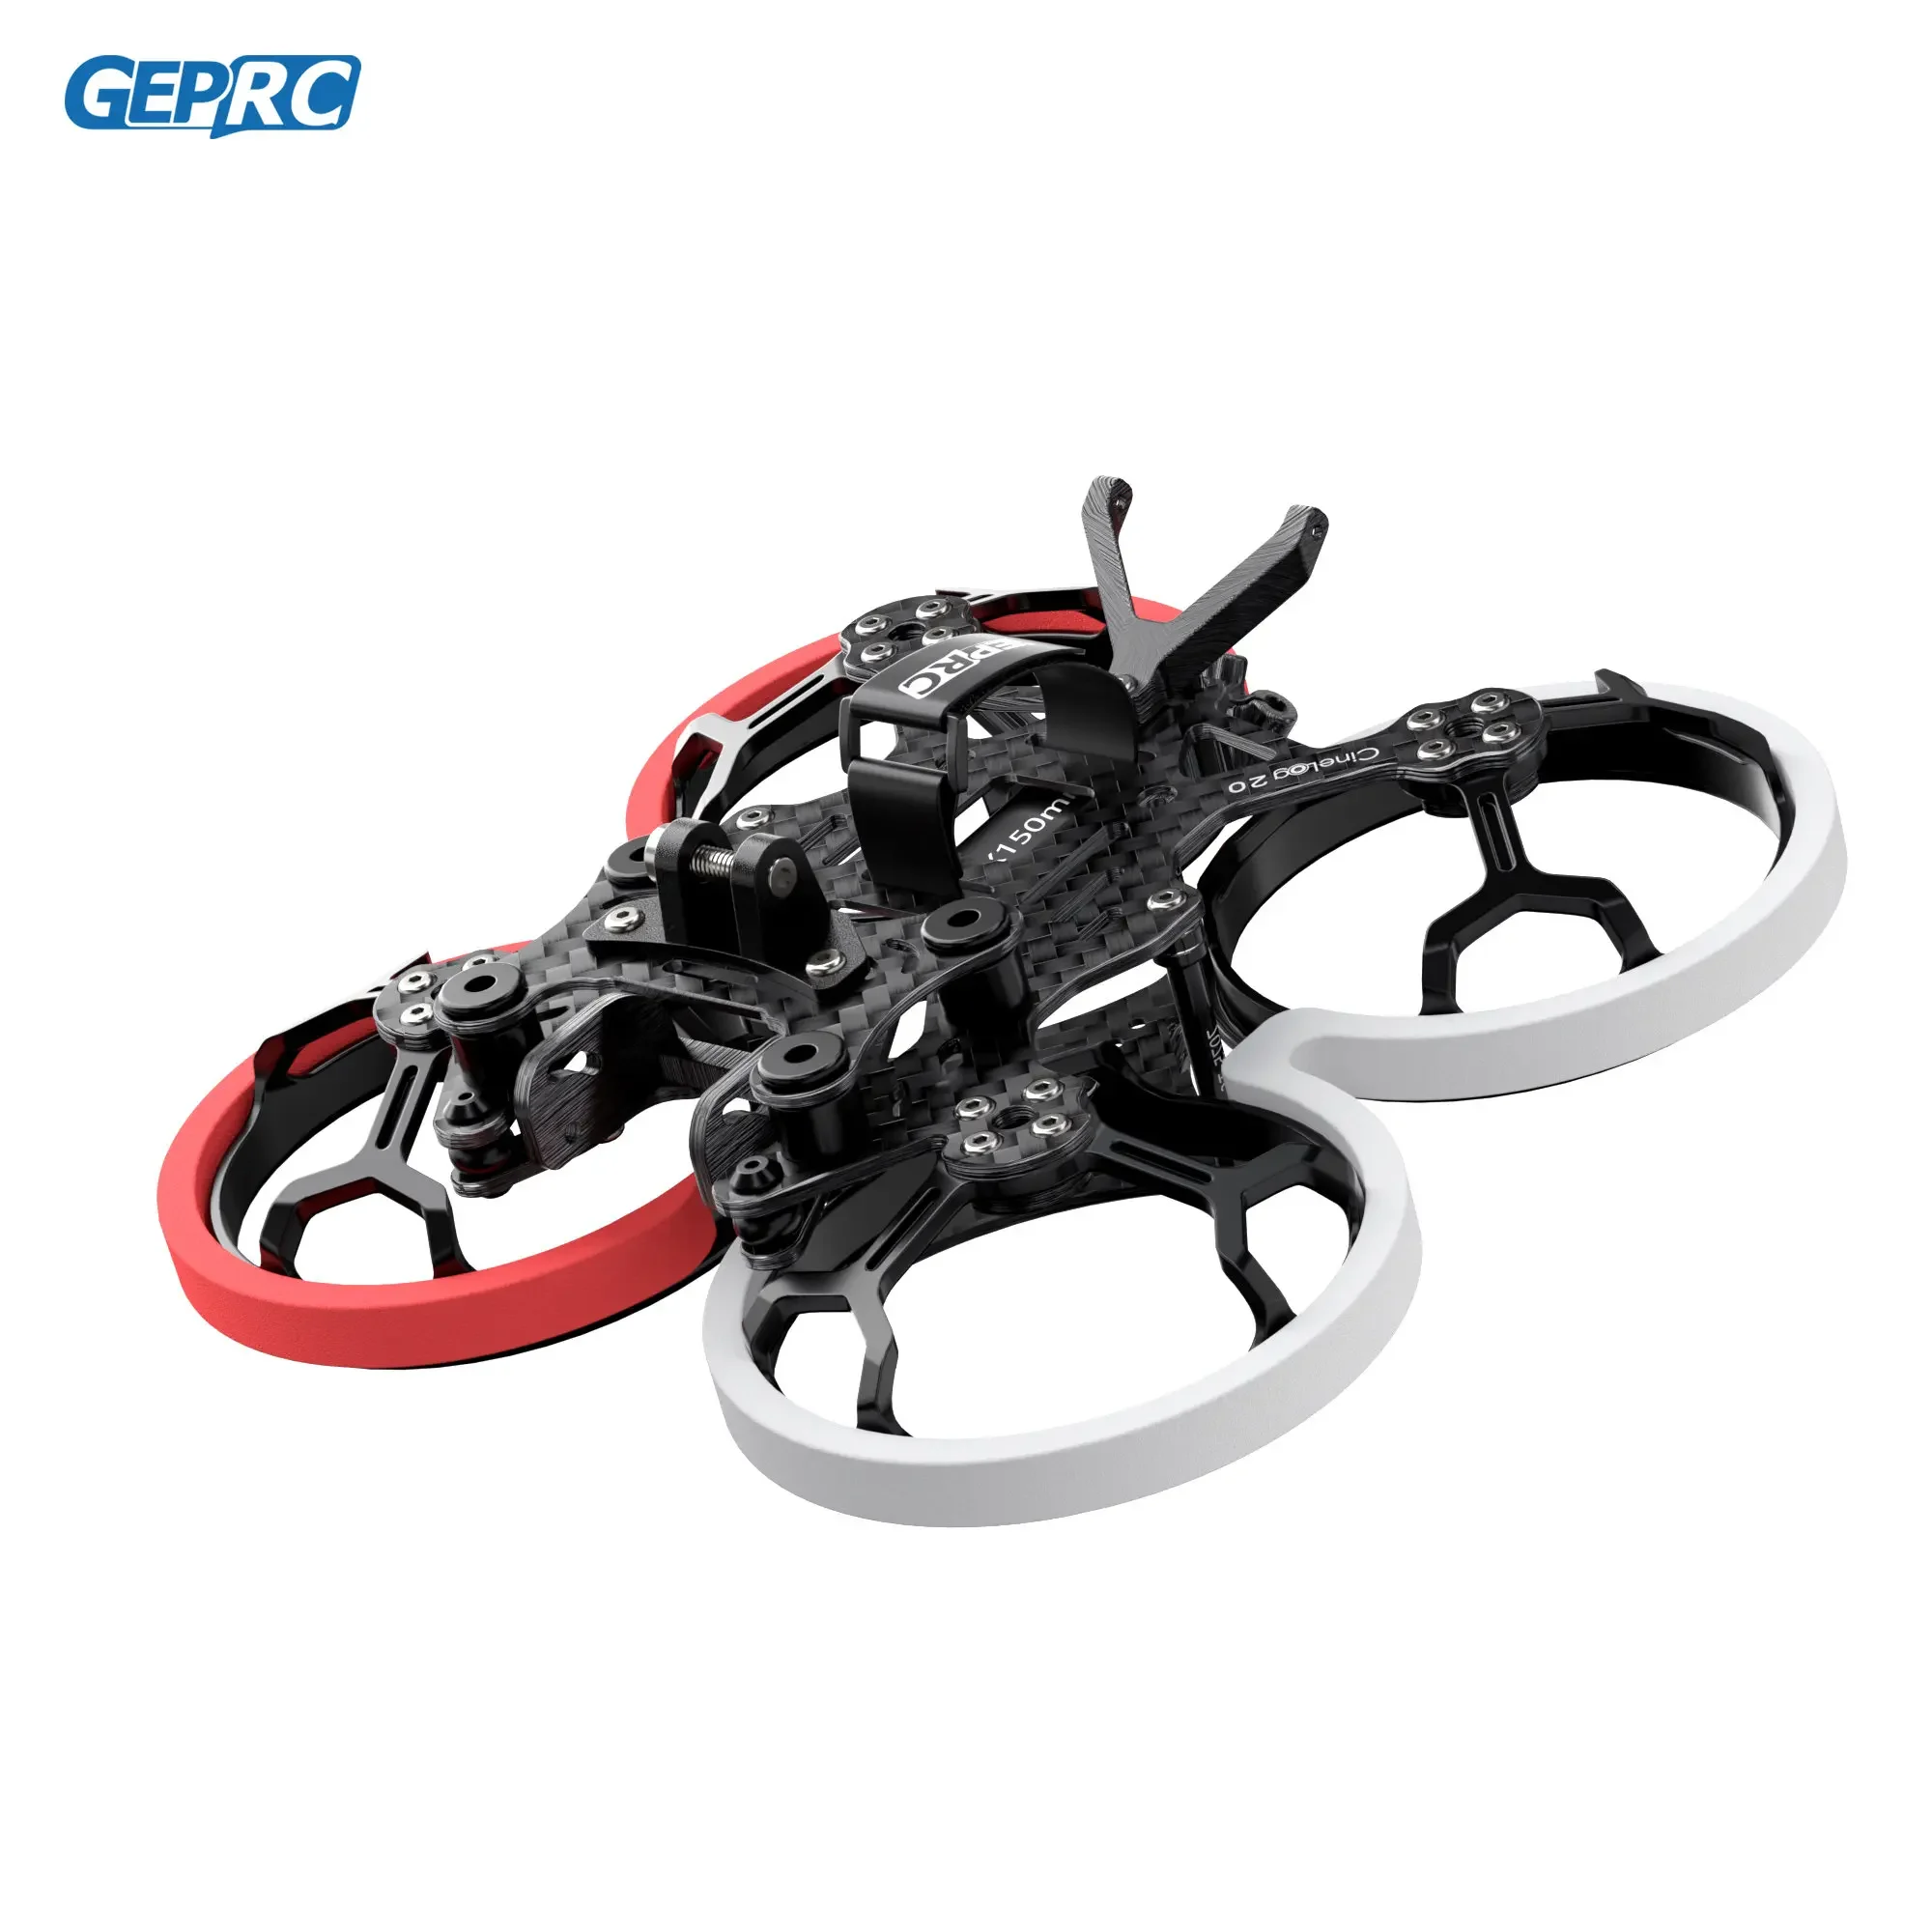 

GEPRC GEP-CL20 Frame Parts Propeller Accessory Base Quadcopter Frame FPV Freestyle RC Racing Drone CineLog20 HD O3